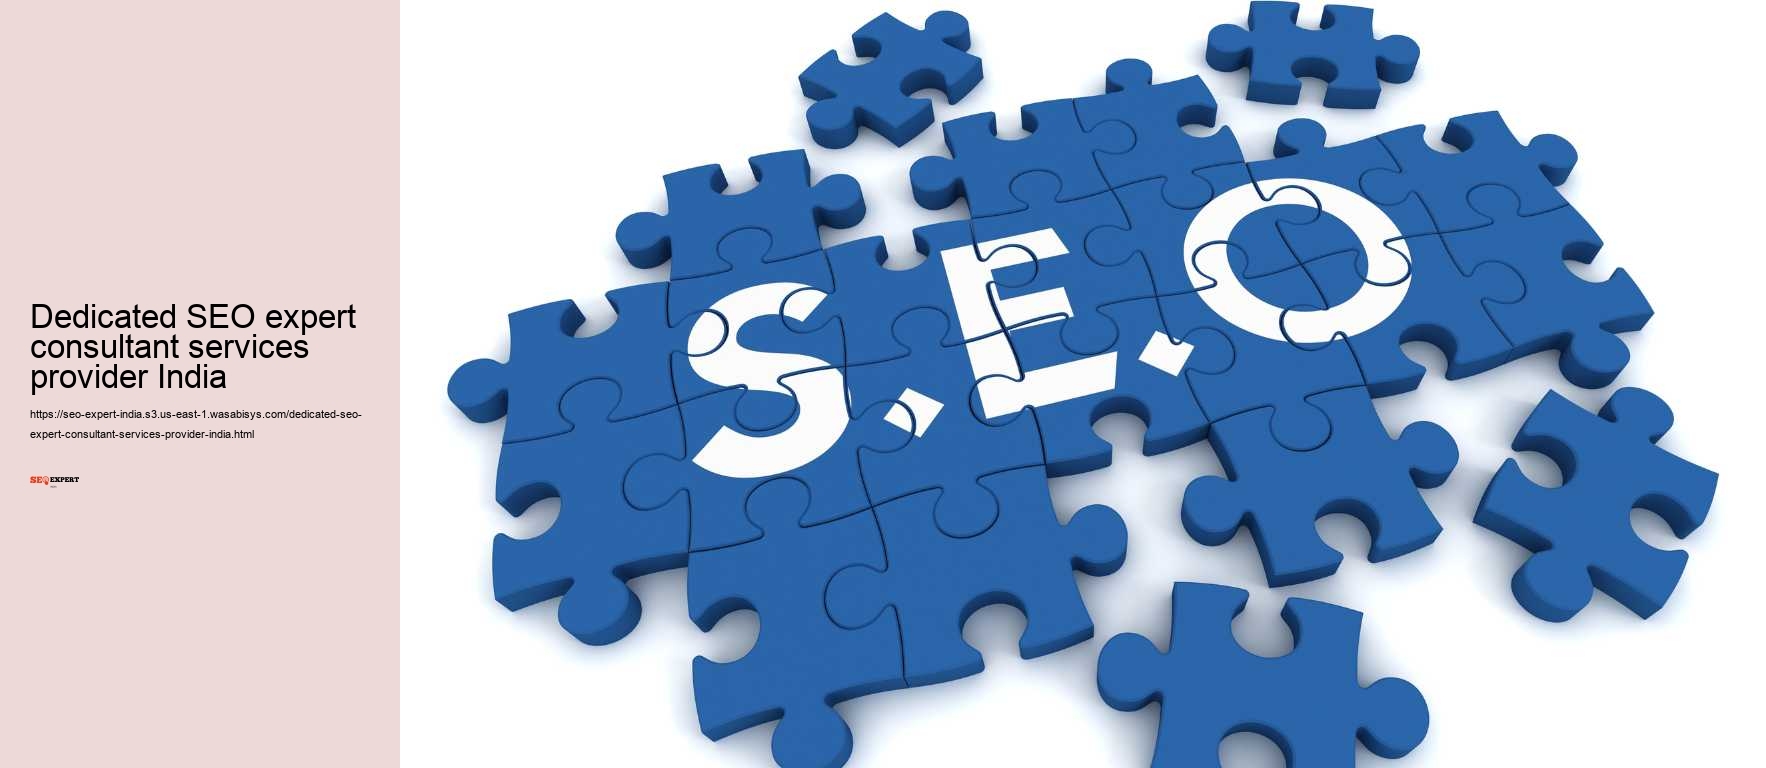 Dedicated SEO expert consultant services provider India